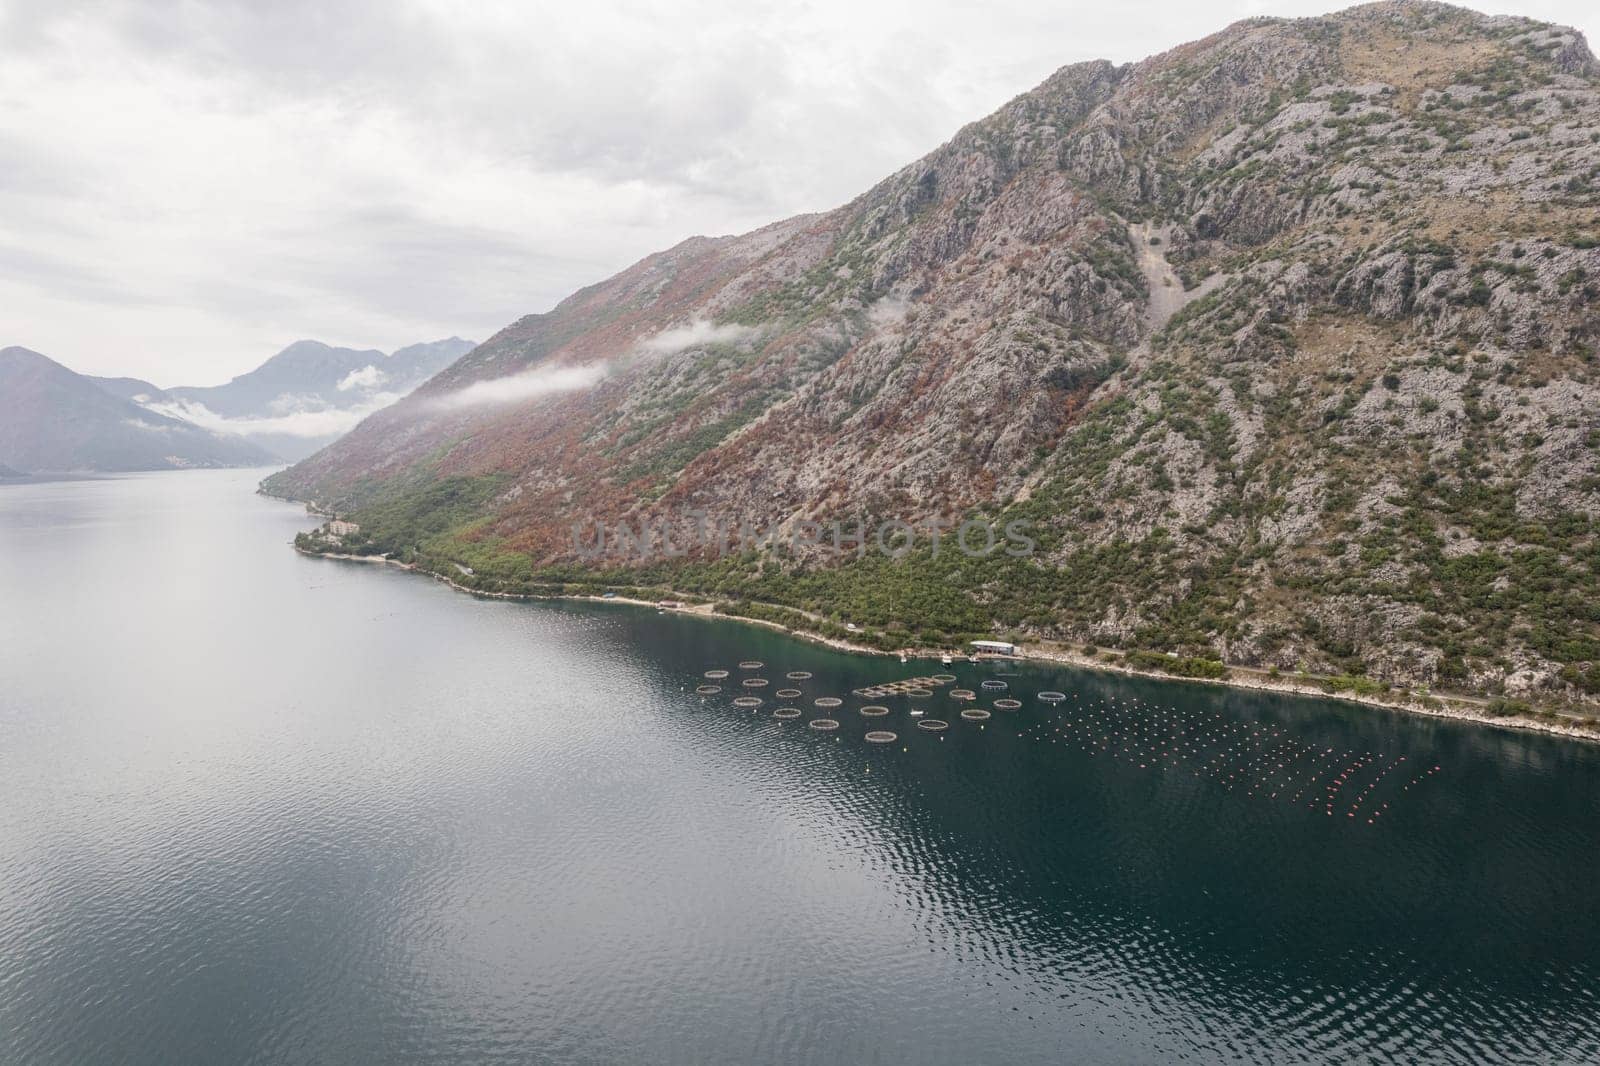 Fish farm in the blue sea at the foot of the misty mountains. Montenegro. Drone. High quality photo